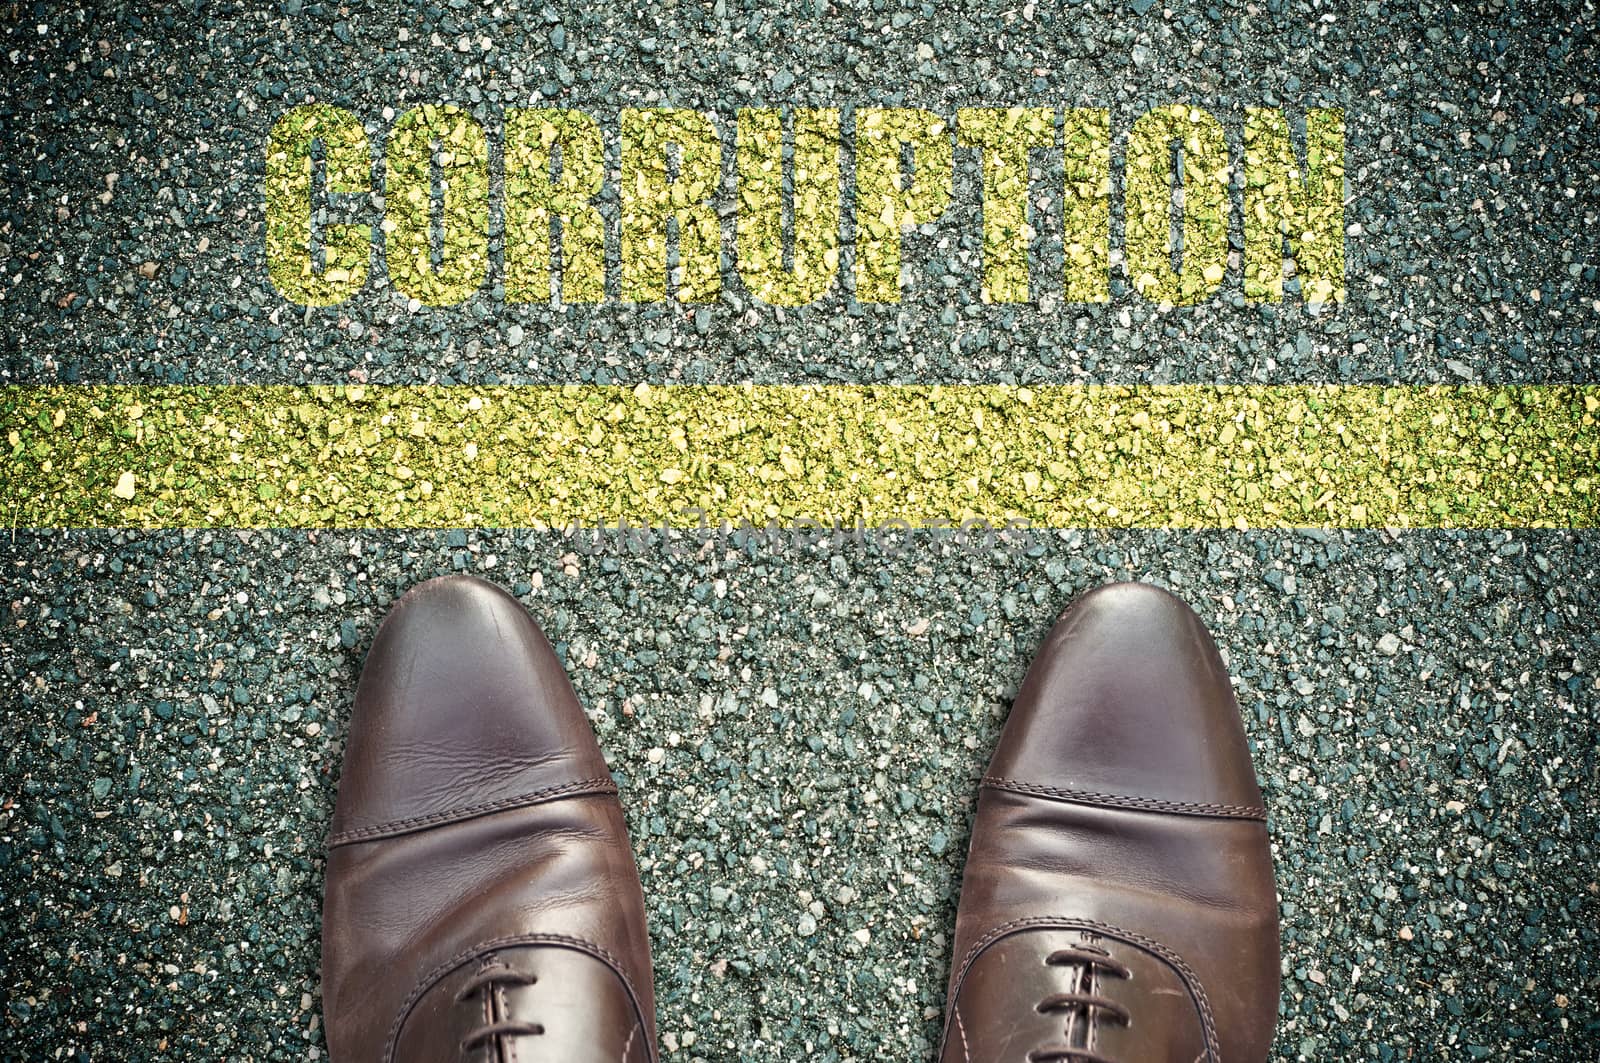 concept message on the road with feet - corruption